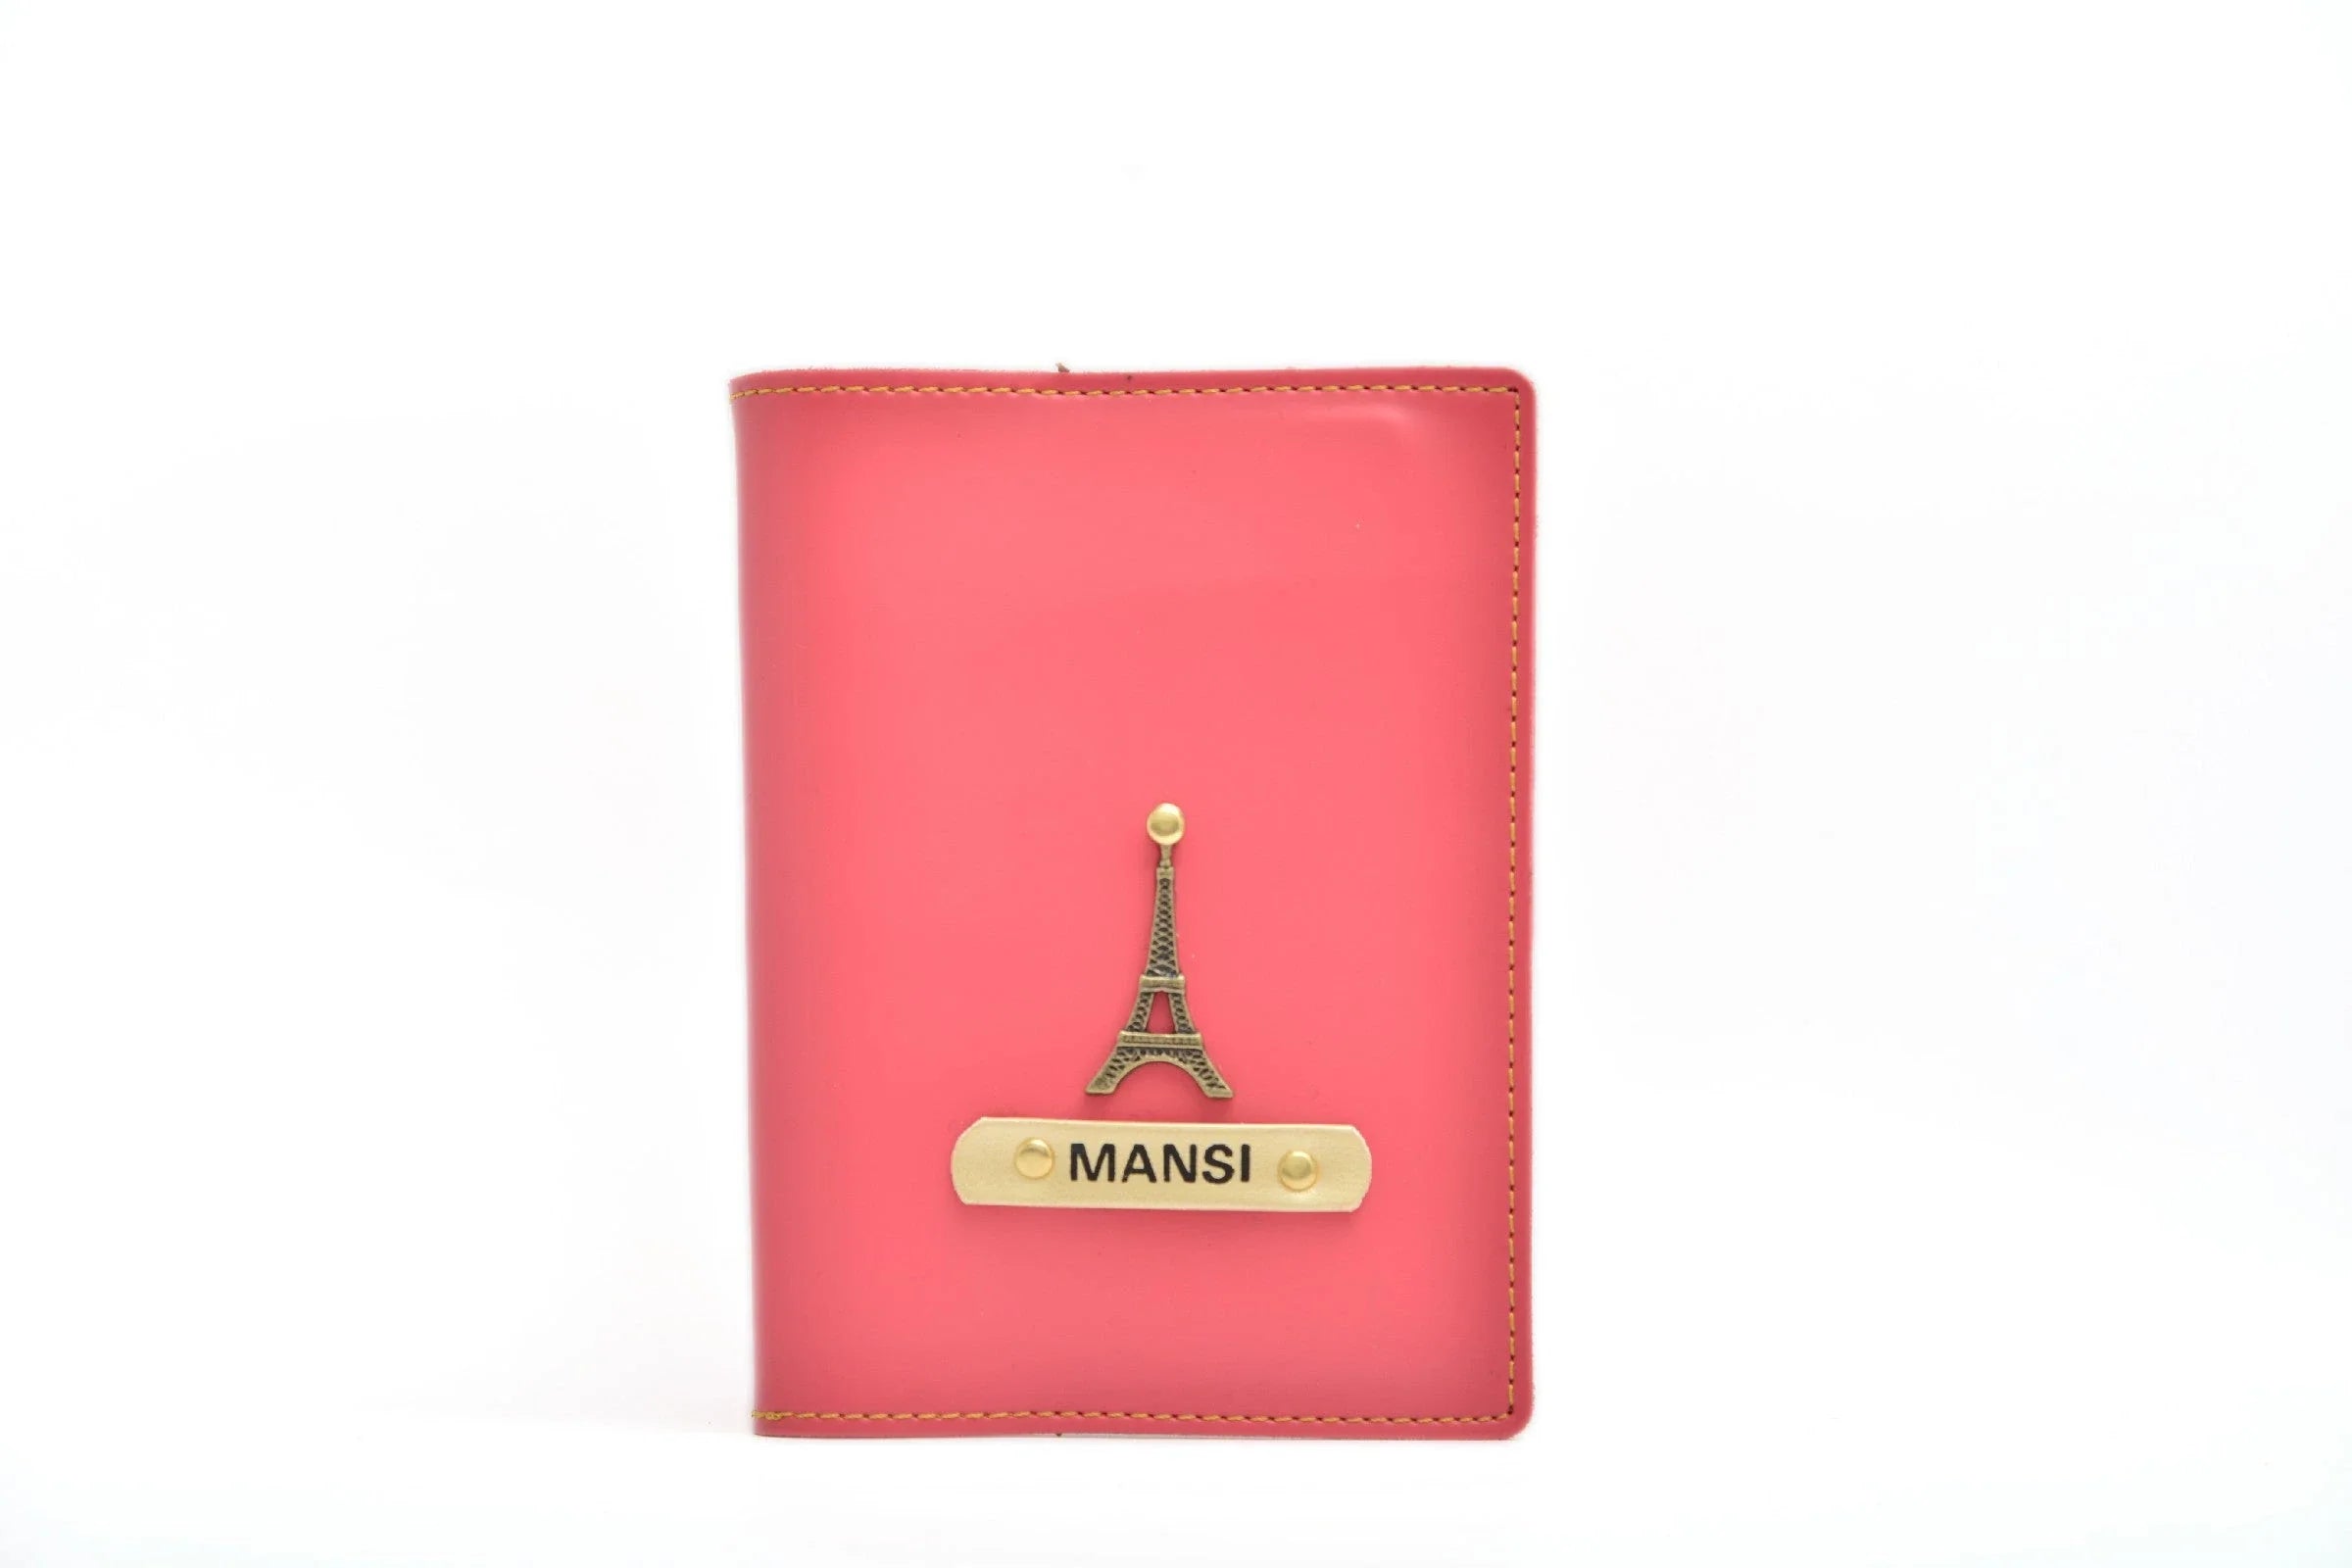 Personalized Premium Quality Leather Wallet & Rudraksh Bracelet Gift S